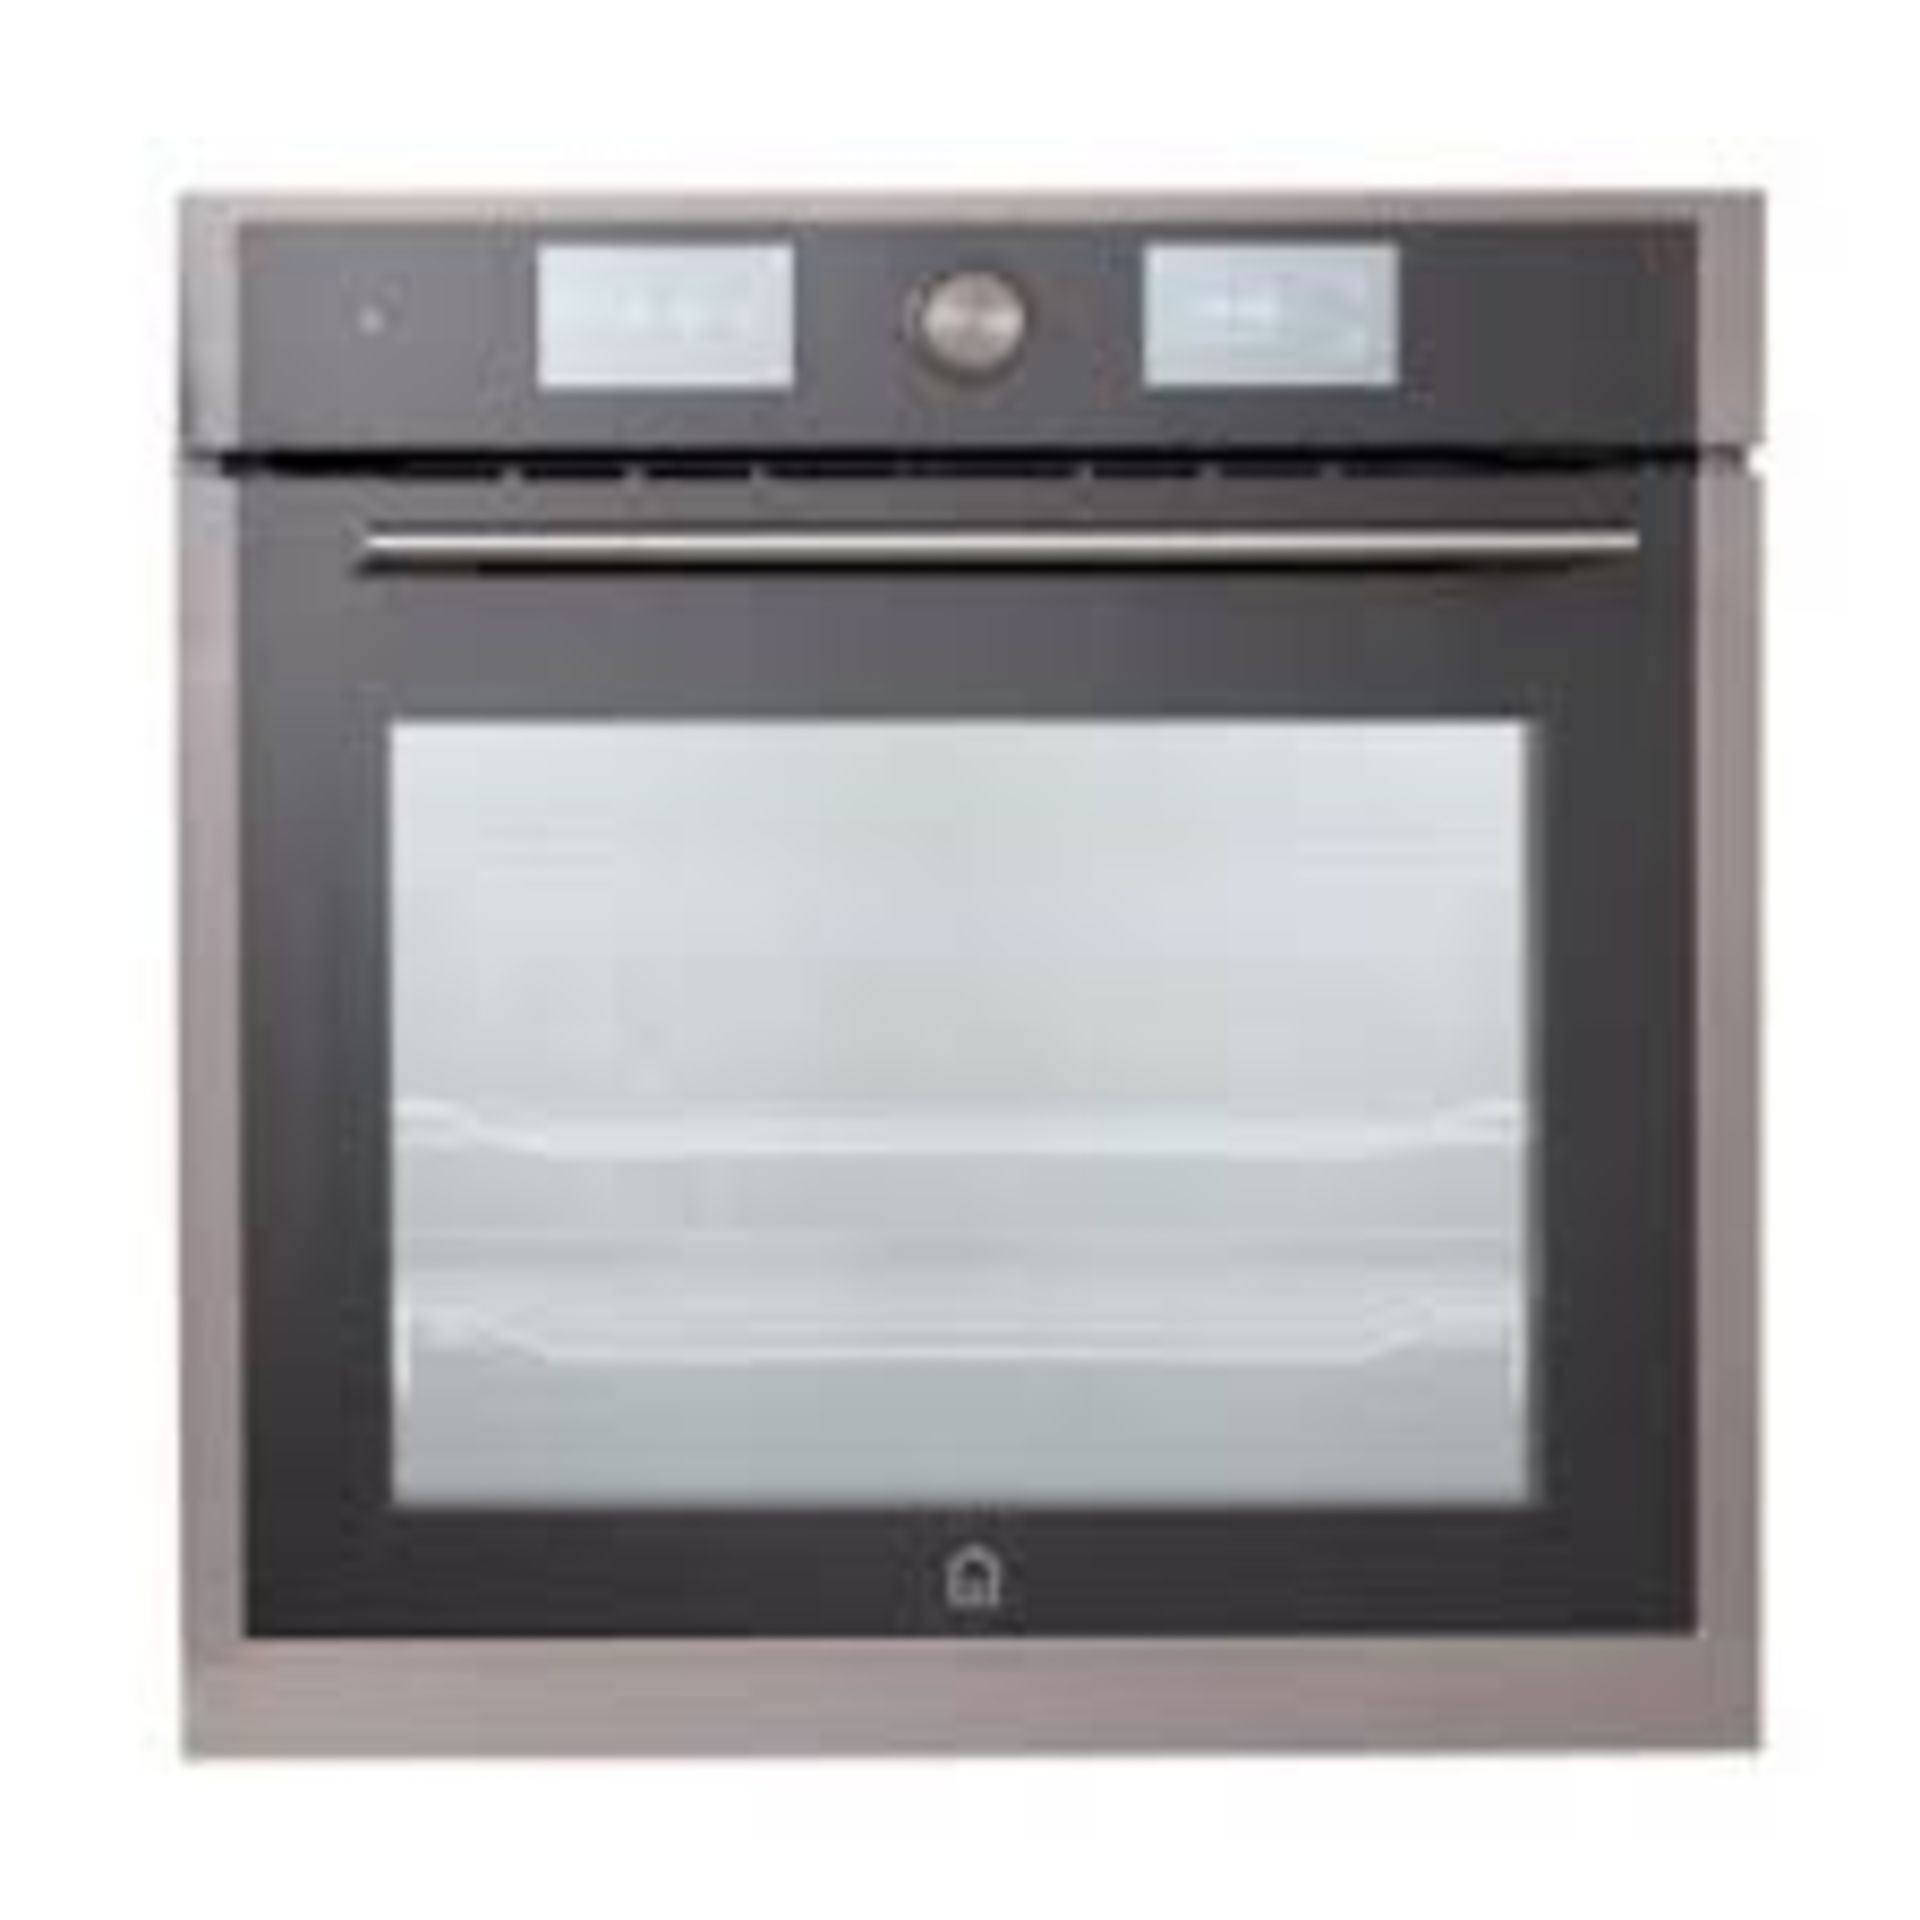 GoodHome GHMF71 Built-in Single Multifunction Oven. - ER46. Our GoodHome appliances are packed